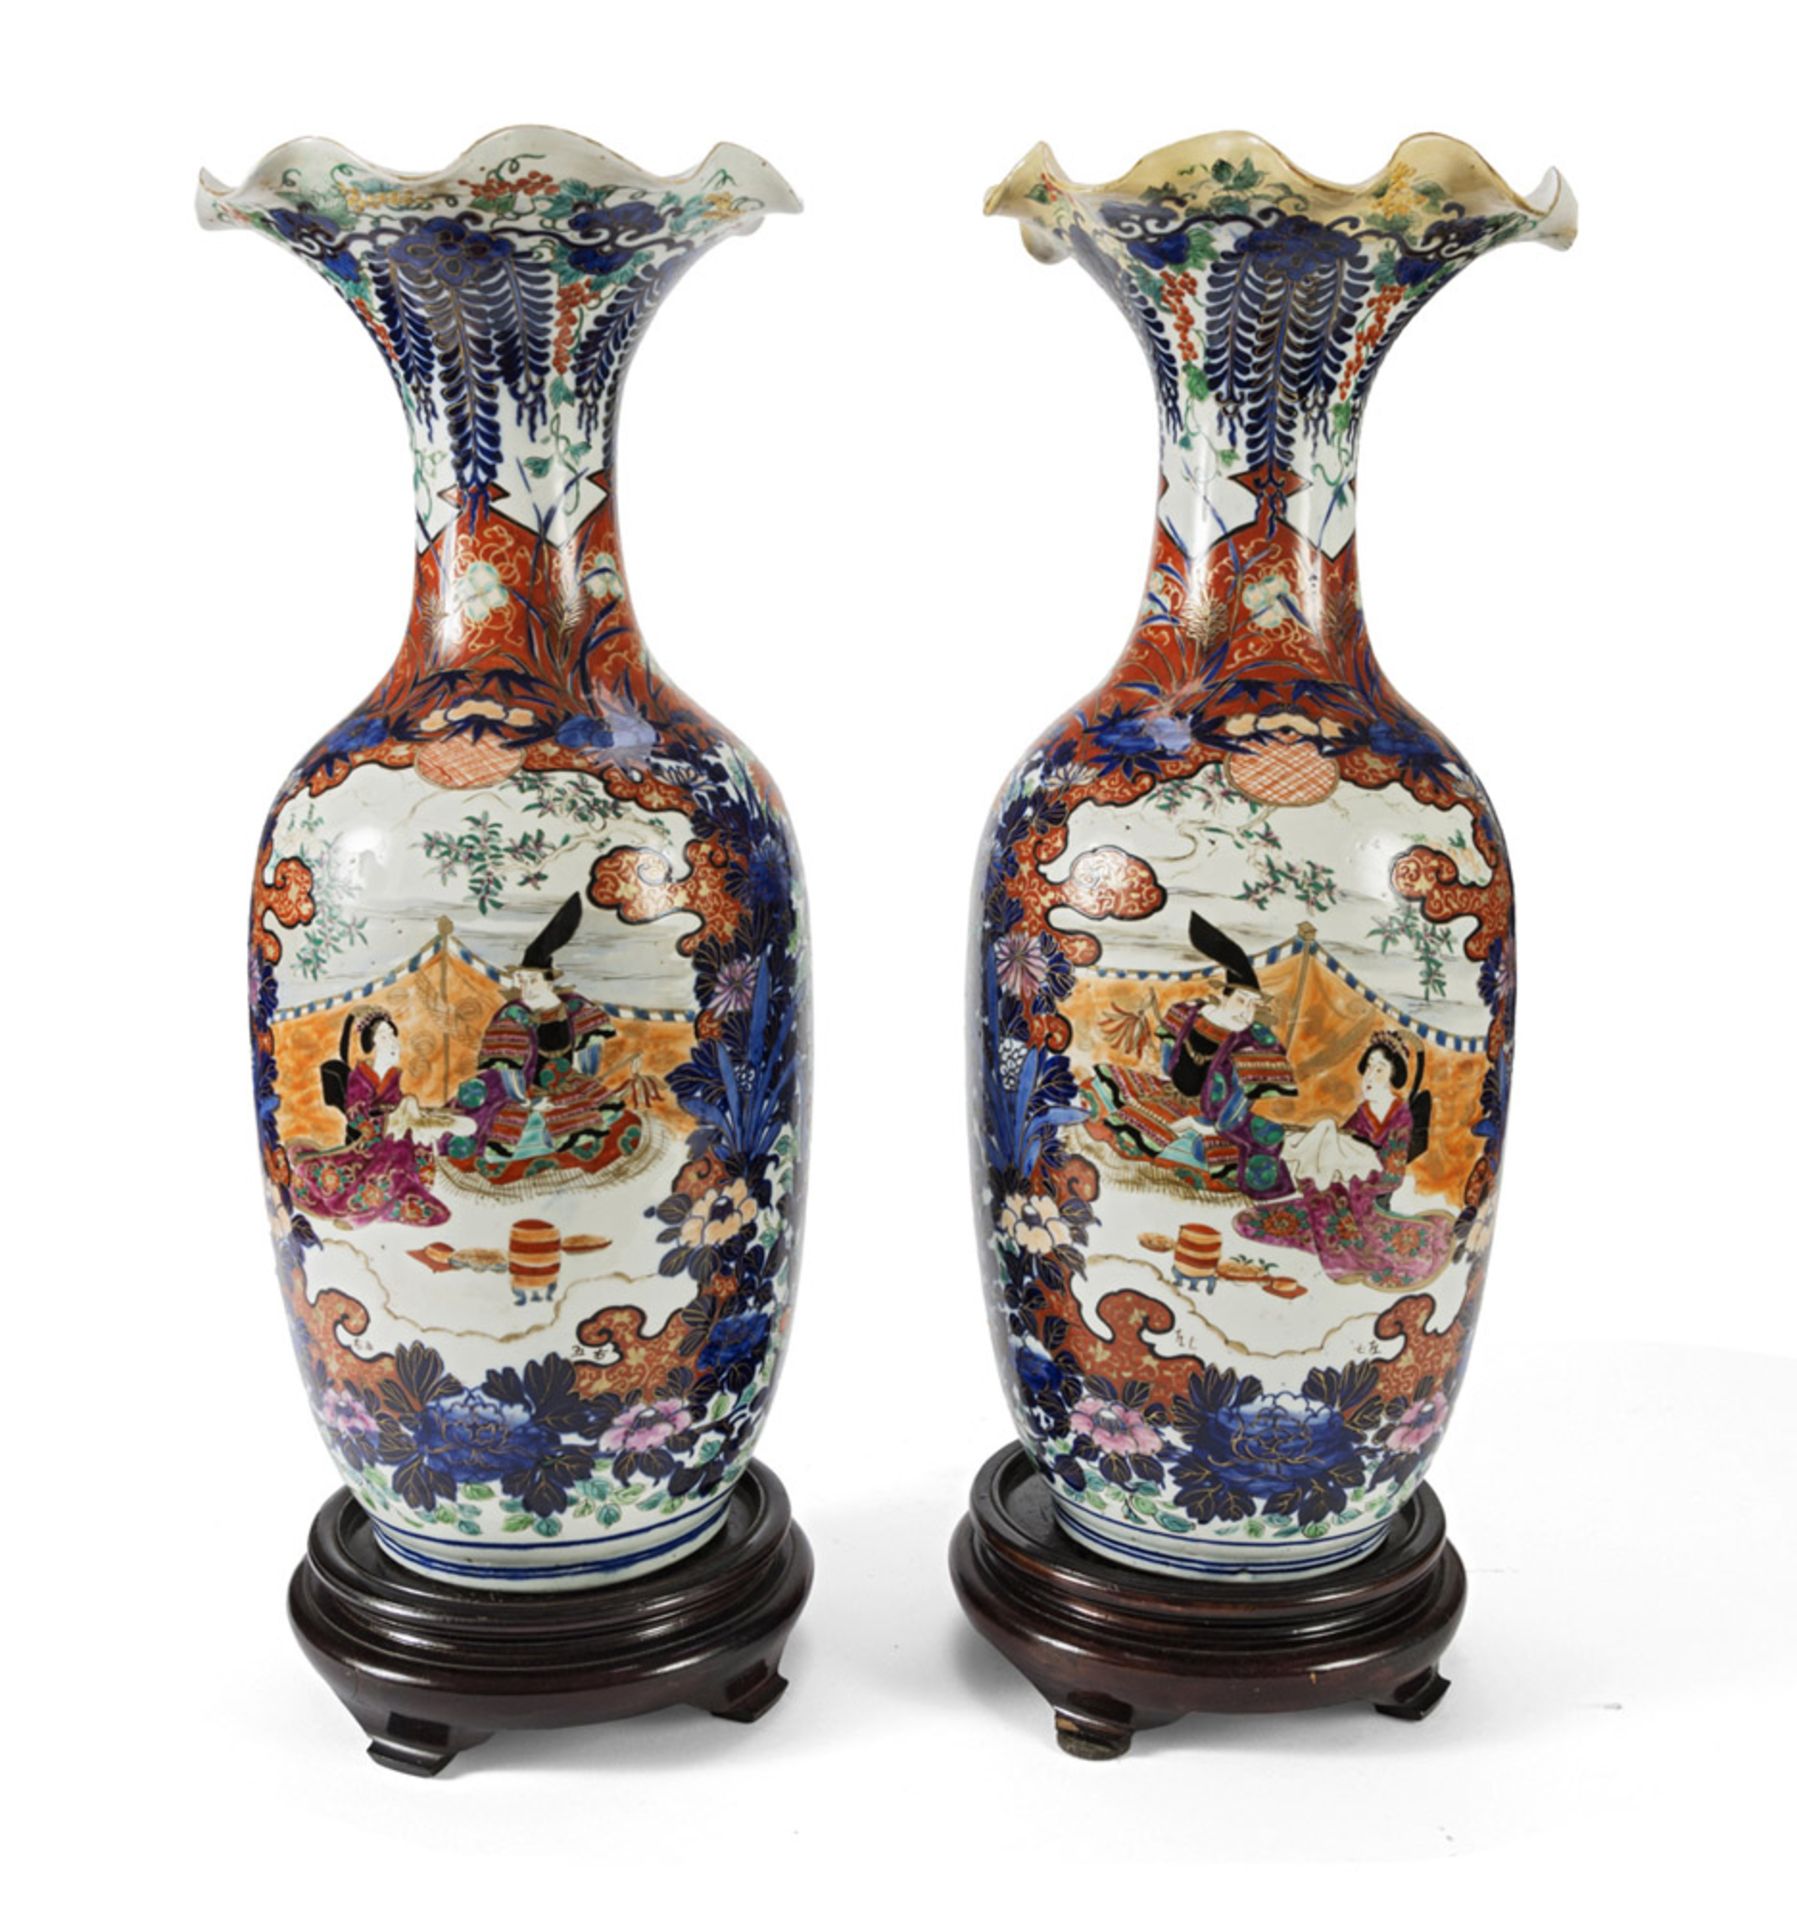 A PAIR OF PORCELAIN VASES IN POLYCHROME ENAMEL, JAPAN, EARLY 20TH CENTURY